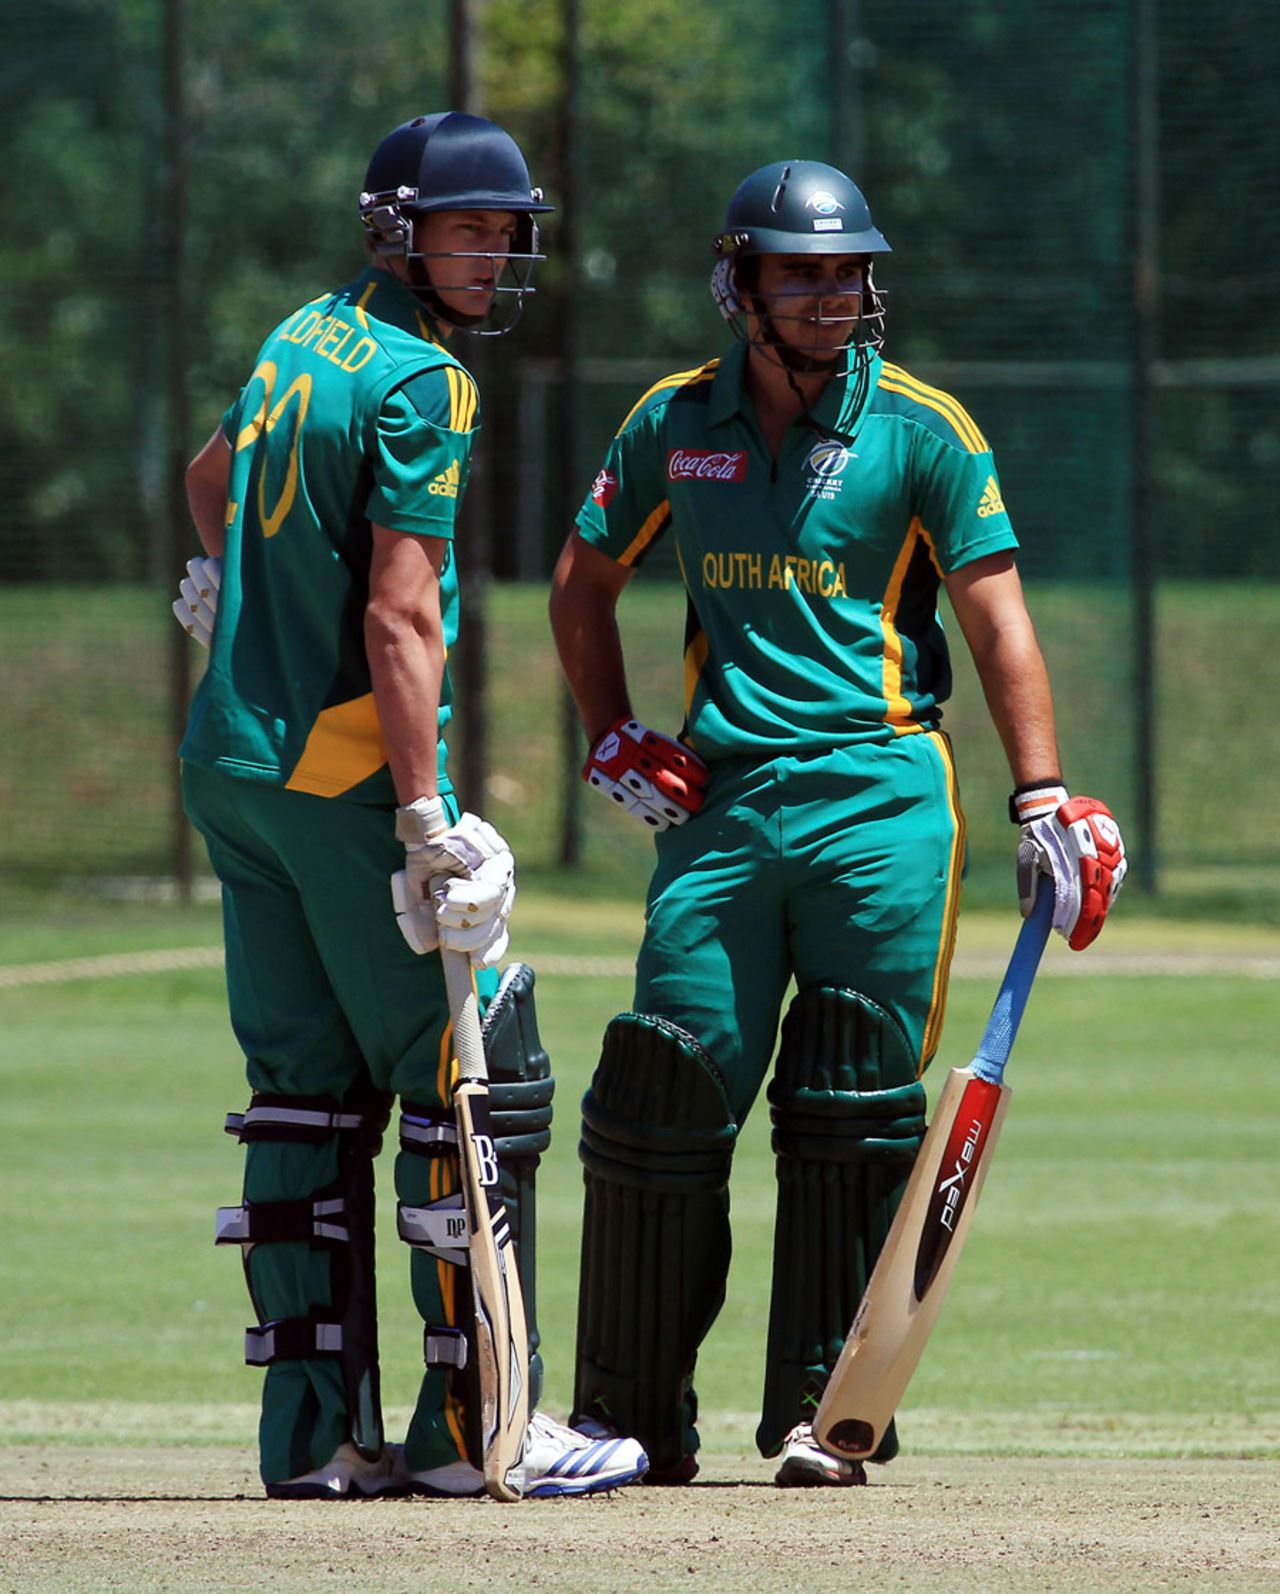 Greg Oldfield and David Bedingham scored 30s, South Africa v England, 2nd Youth ODI, Cape Town, February 15, 2003